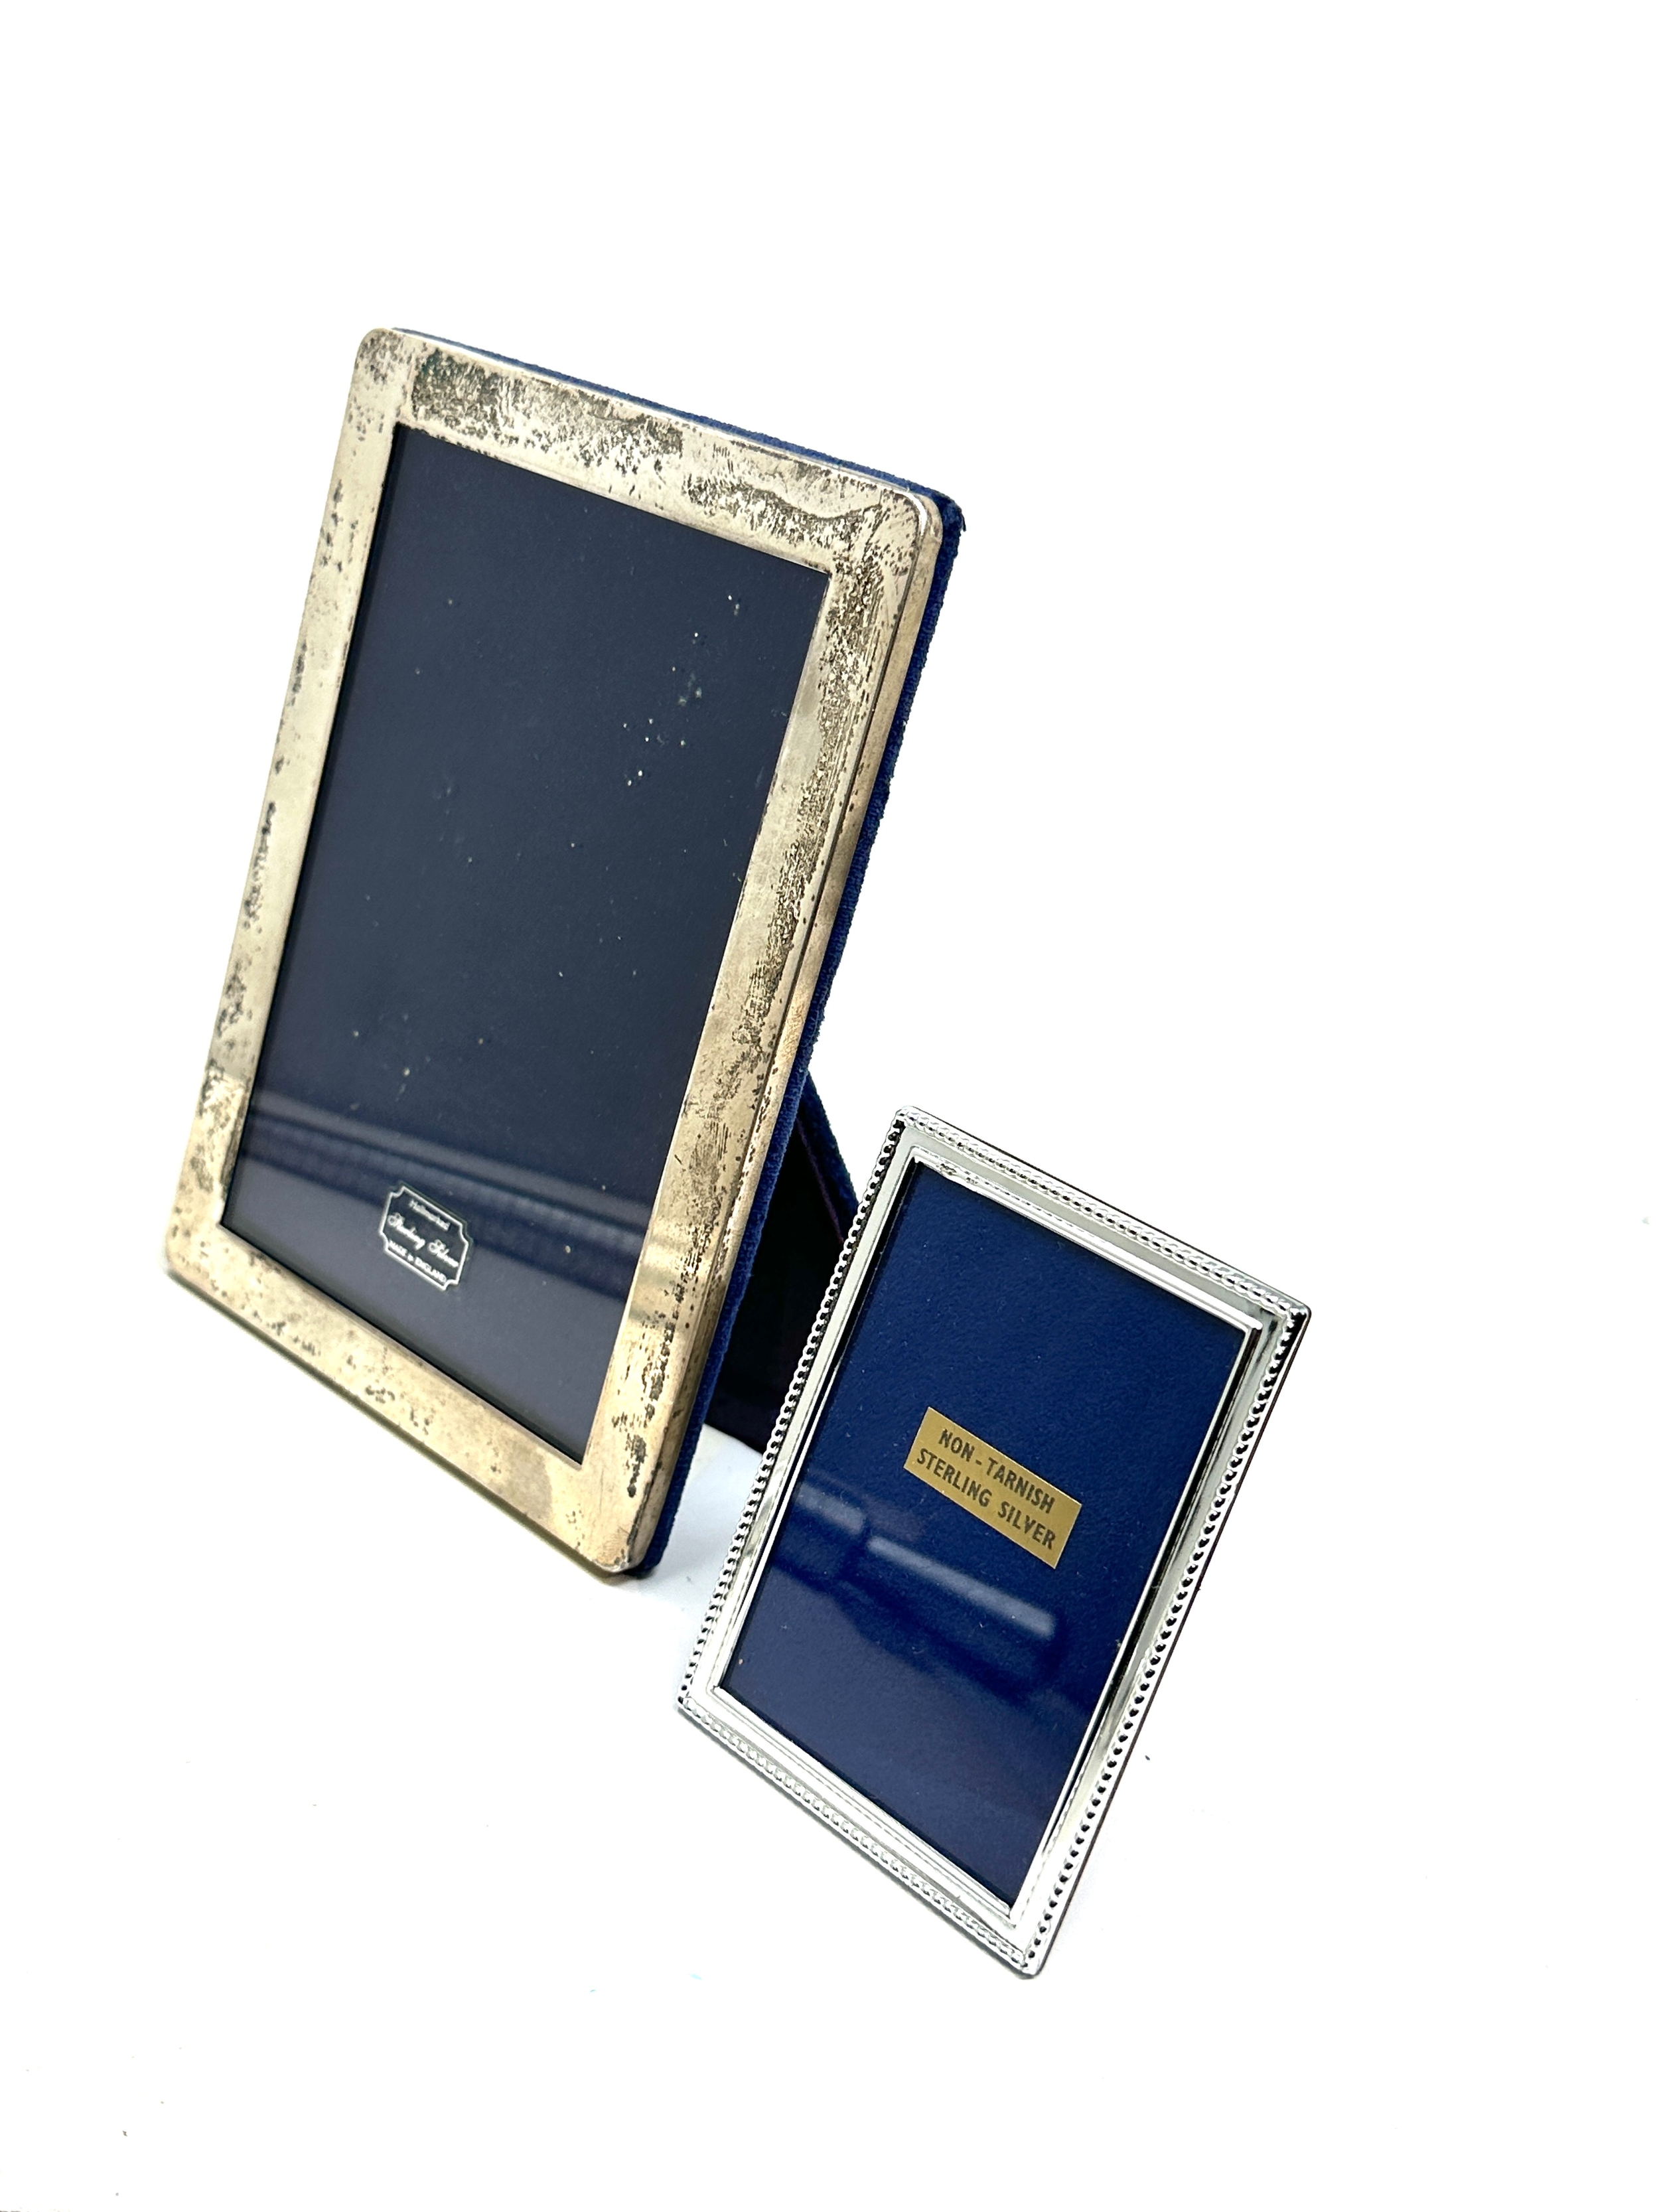 2 silver picture frames largest measures approx 18cm by 13cm - Image 2 of 5